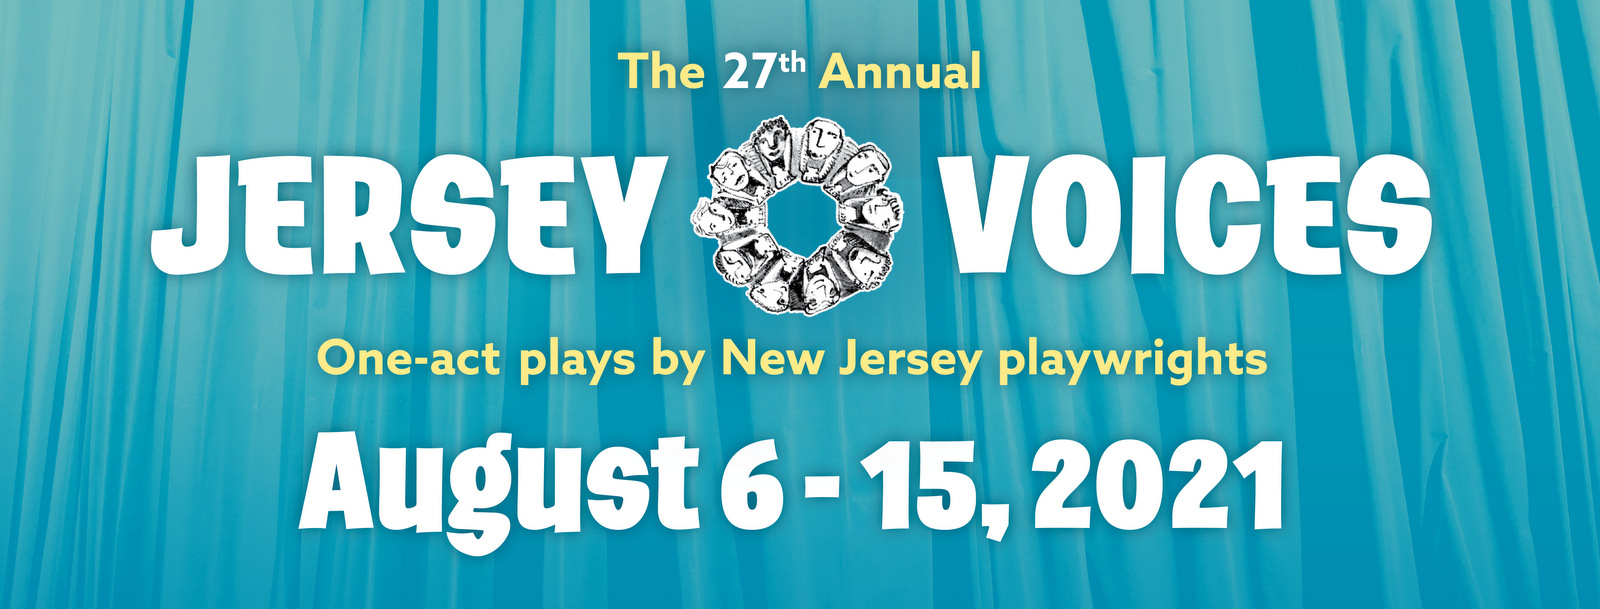 Jersey Voices 2021